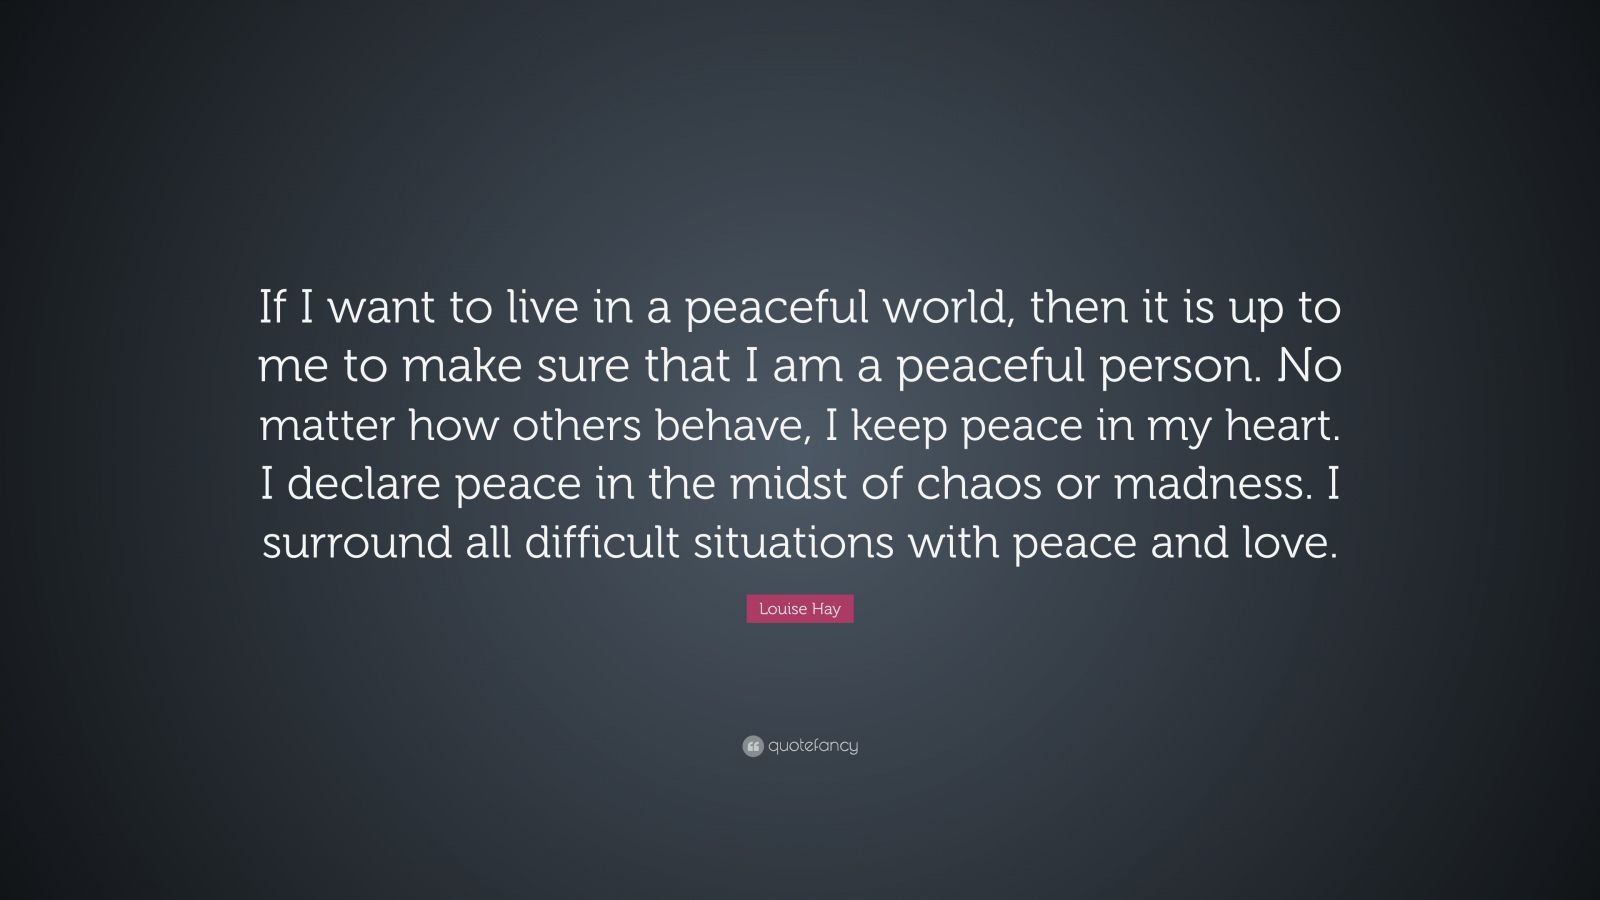 Louise Hay Quote: “If I want to live in a peaceful world, then it ...